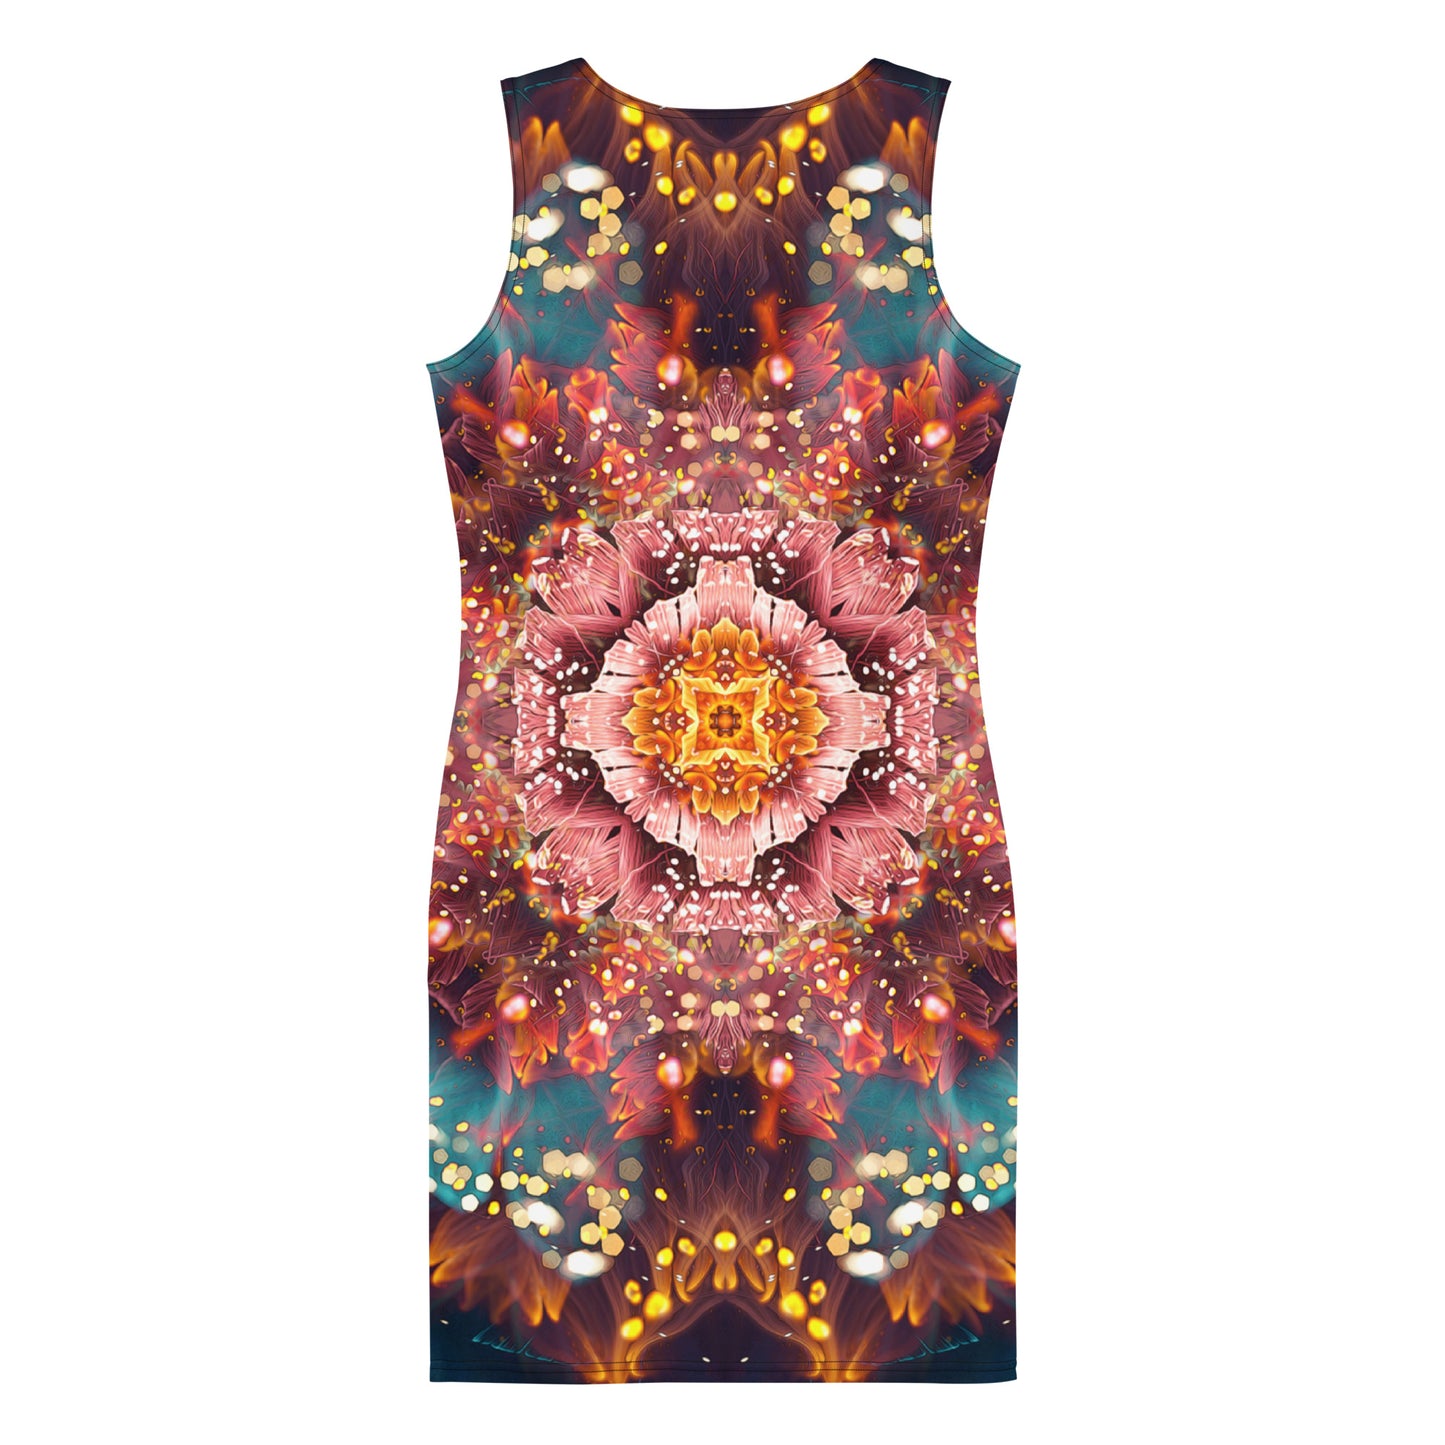 "Reaching for Light" Bodycon FITTED DRESS